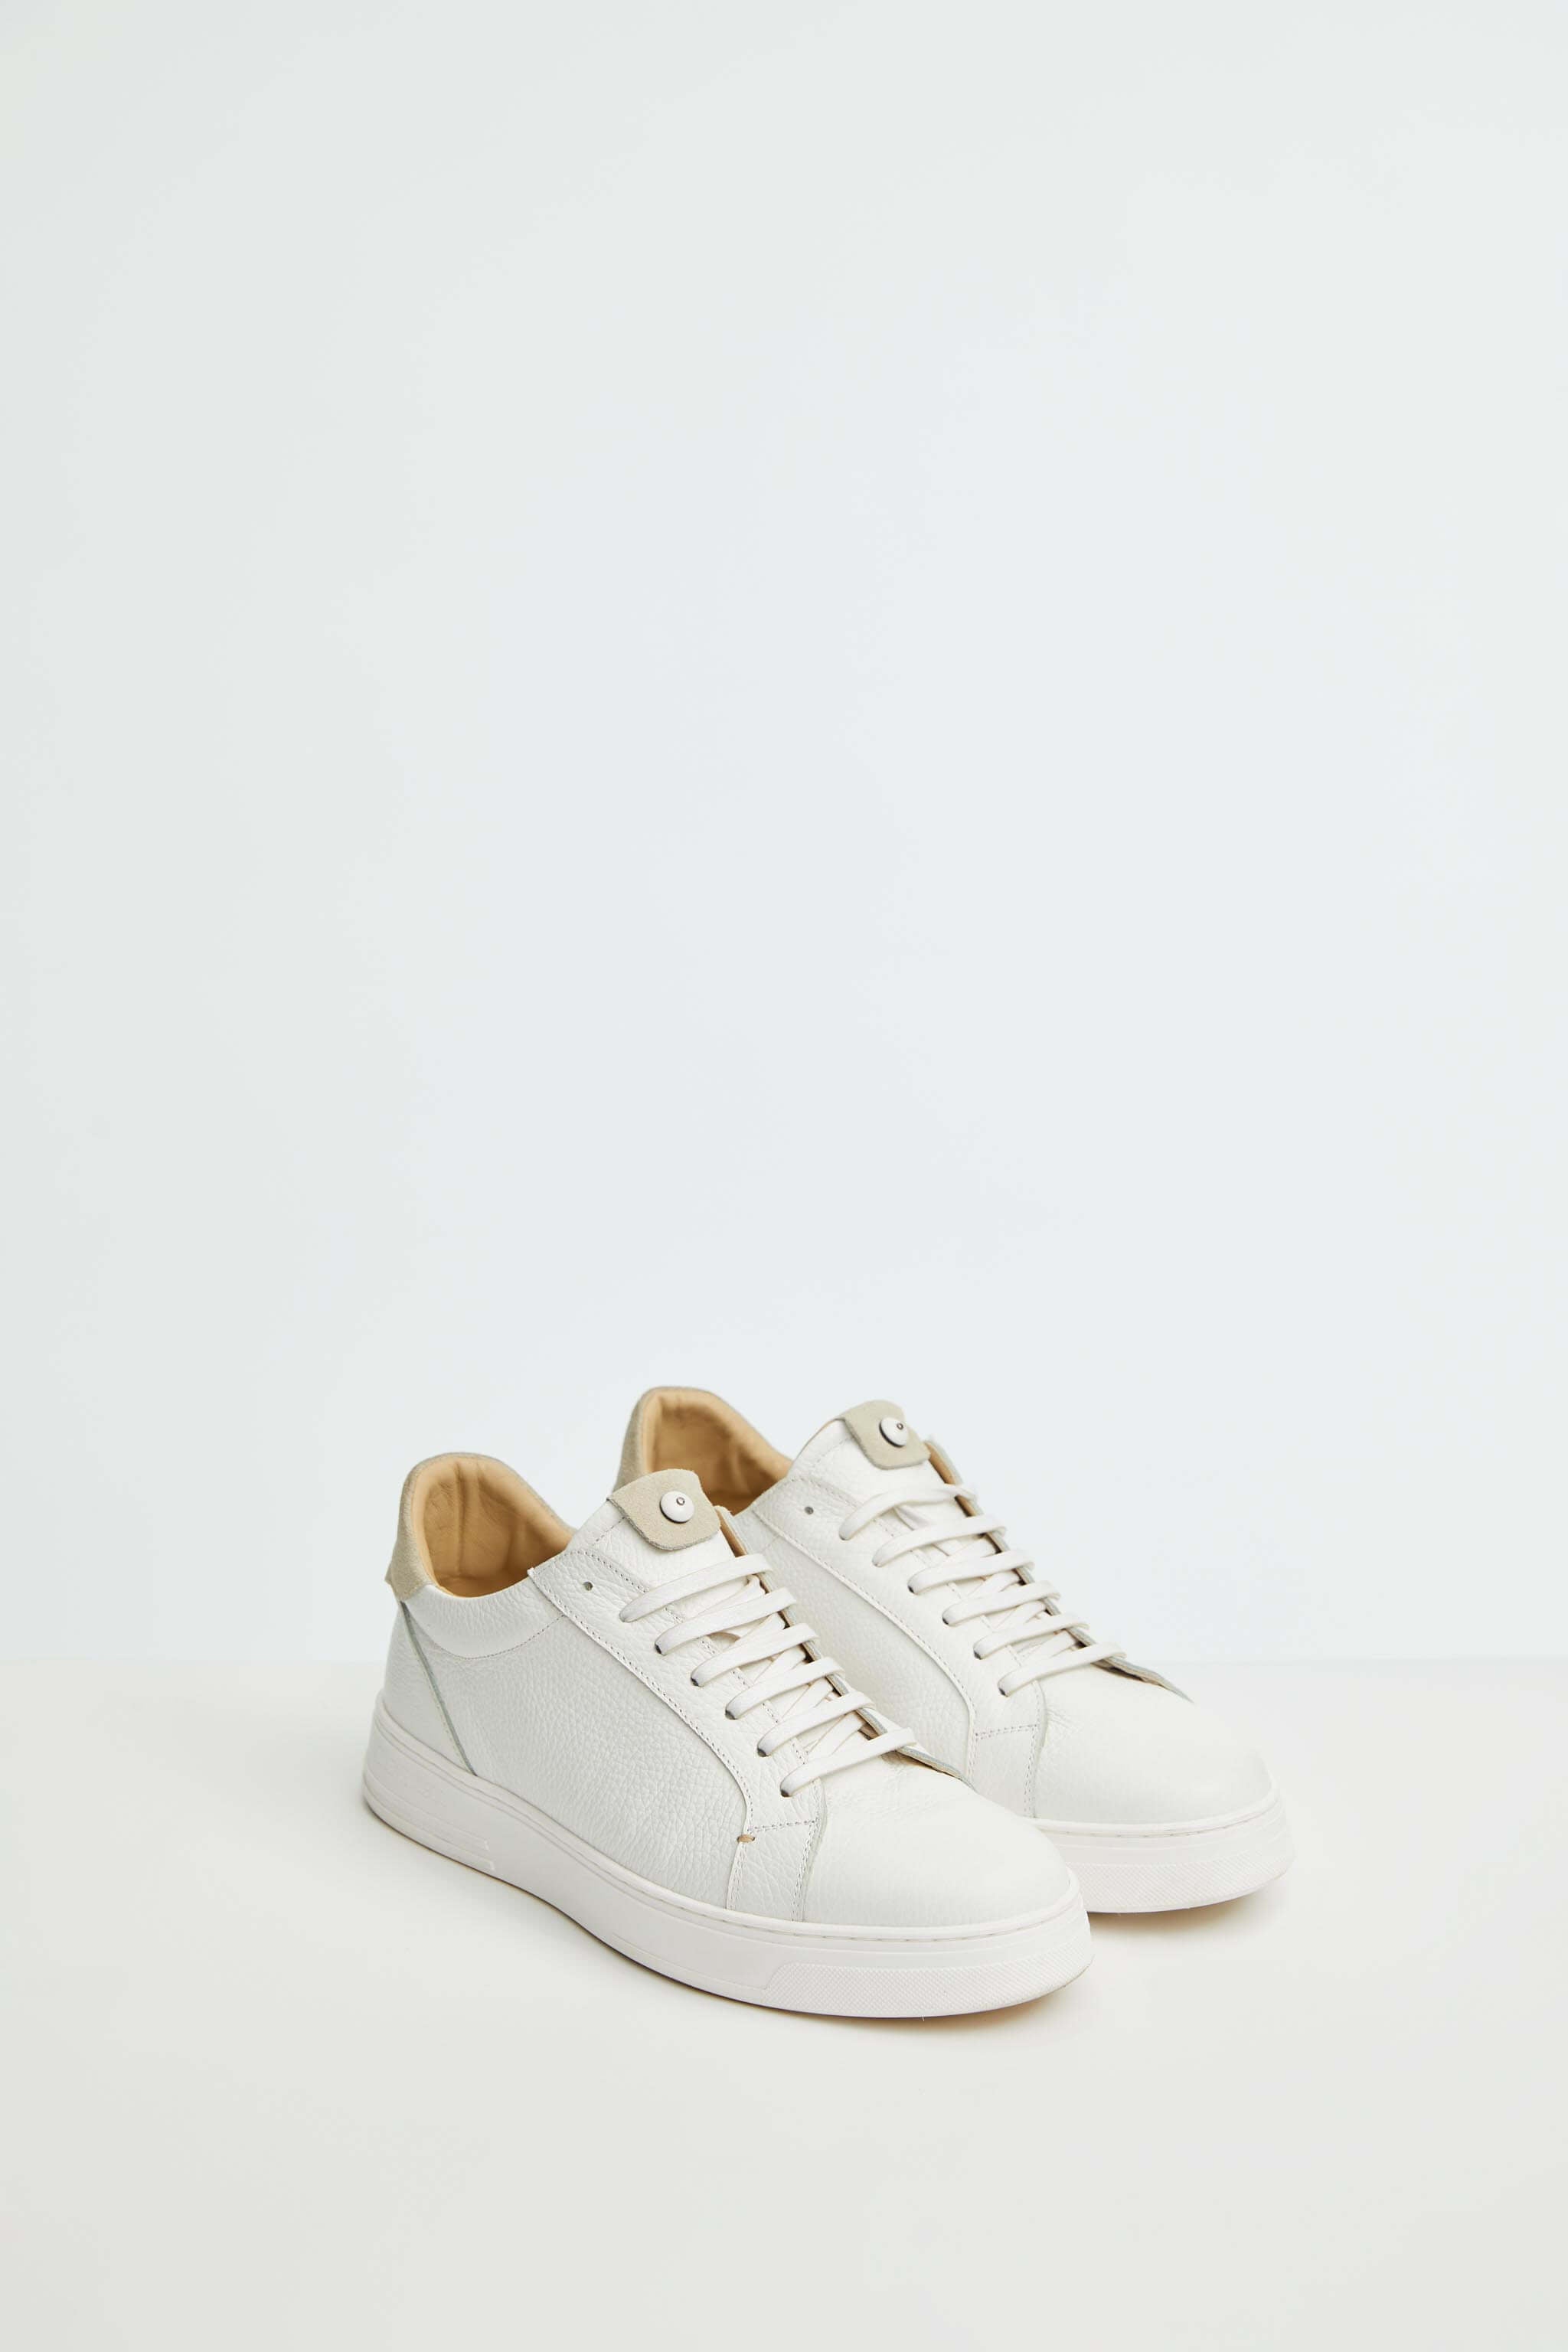 White and beige sneakers